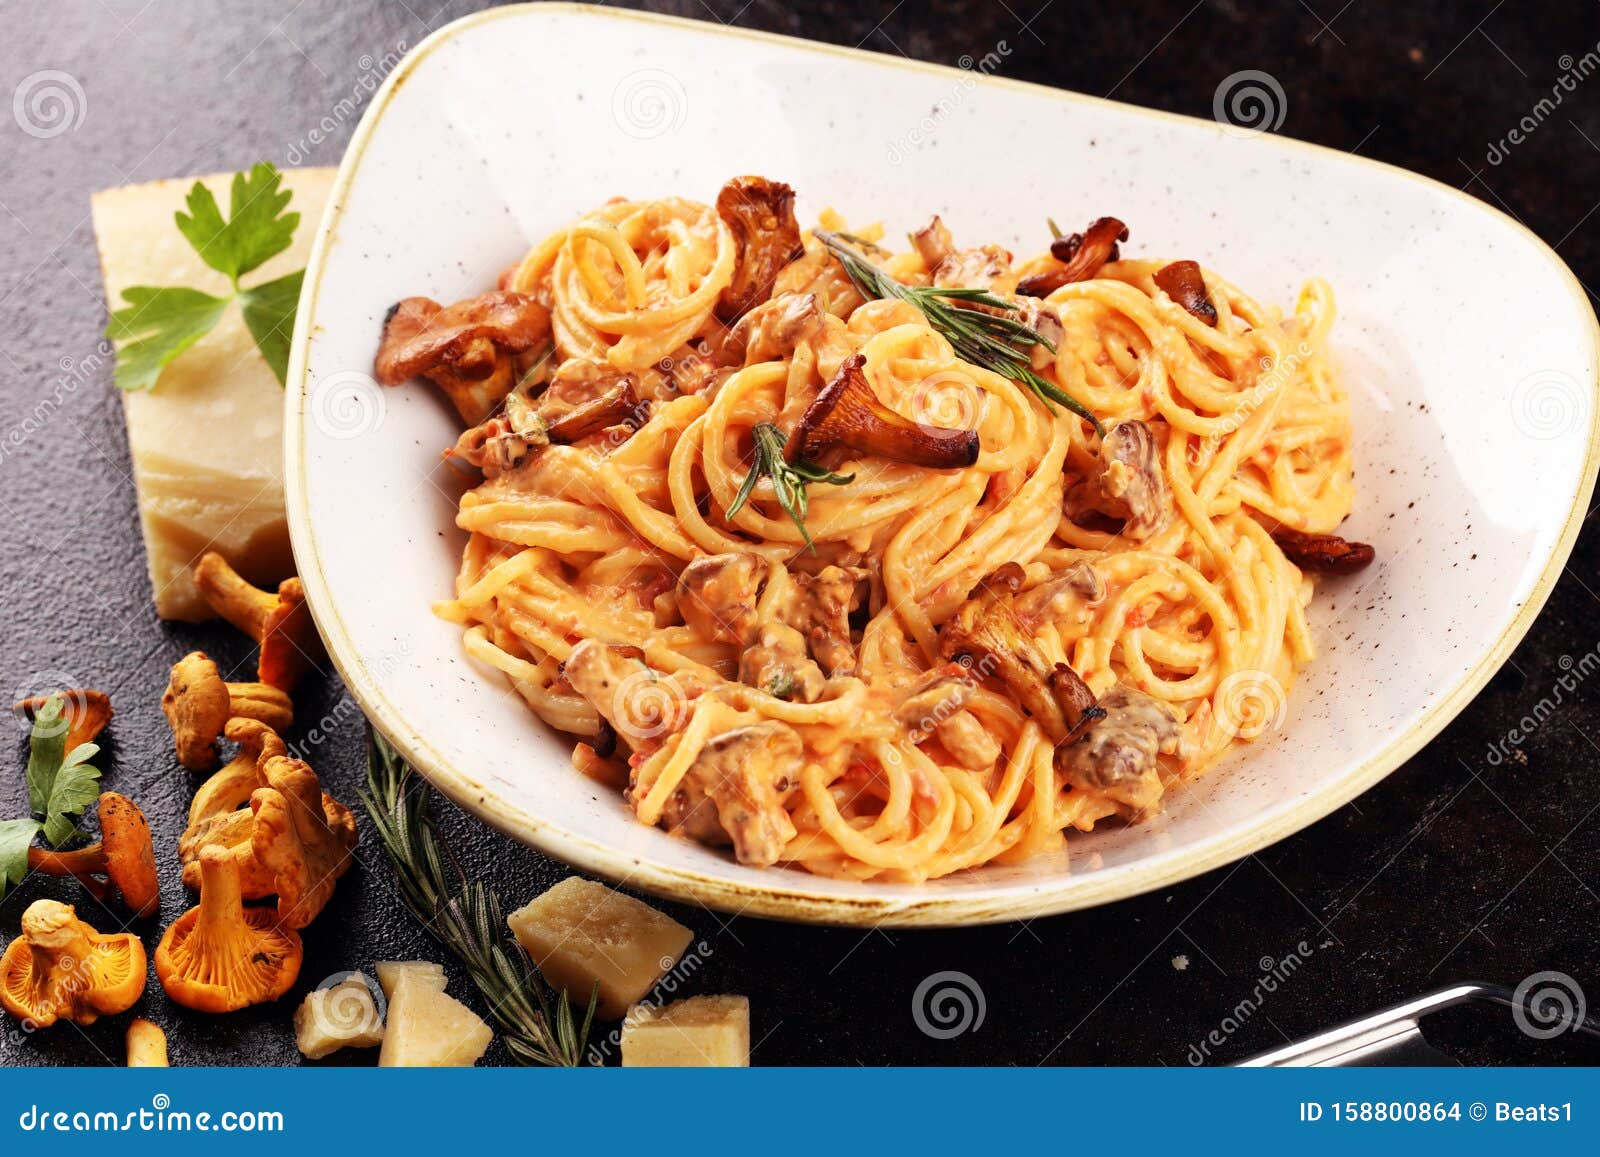 Pasta with Organic Chanterelles. Portion of Spaghetti Pasta with Fried ...